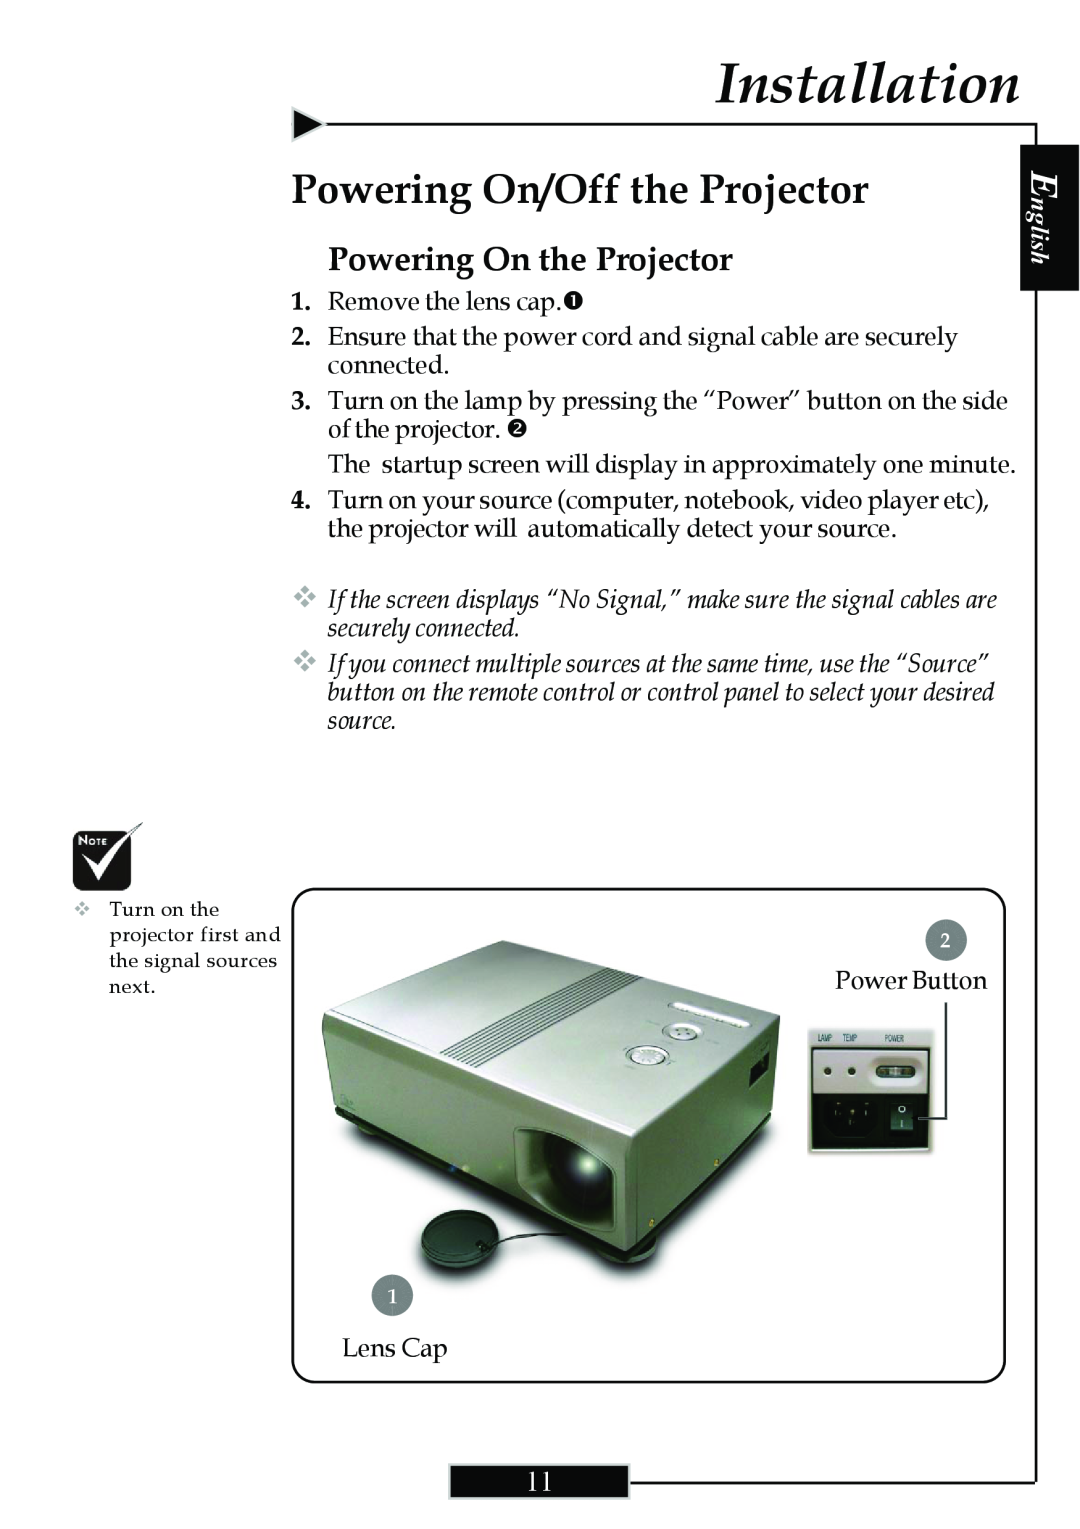 Optoma Technology H77 manual Powering On/Off the Projector, Powering On the Projector, Installation, English 